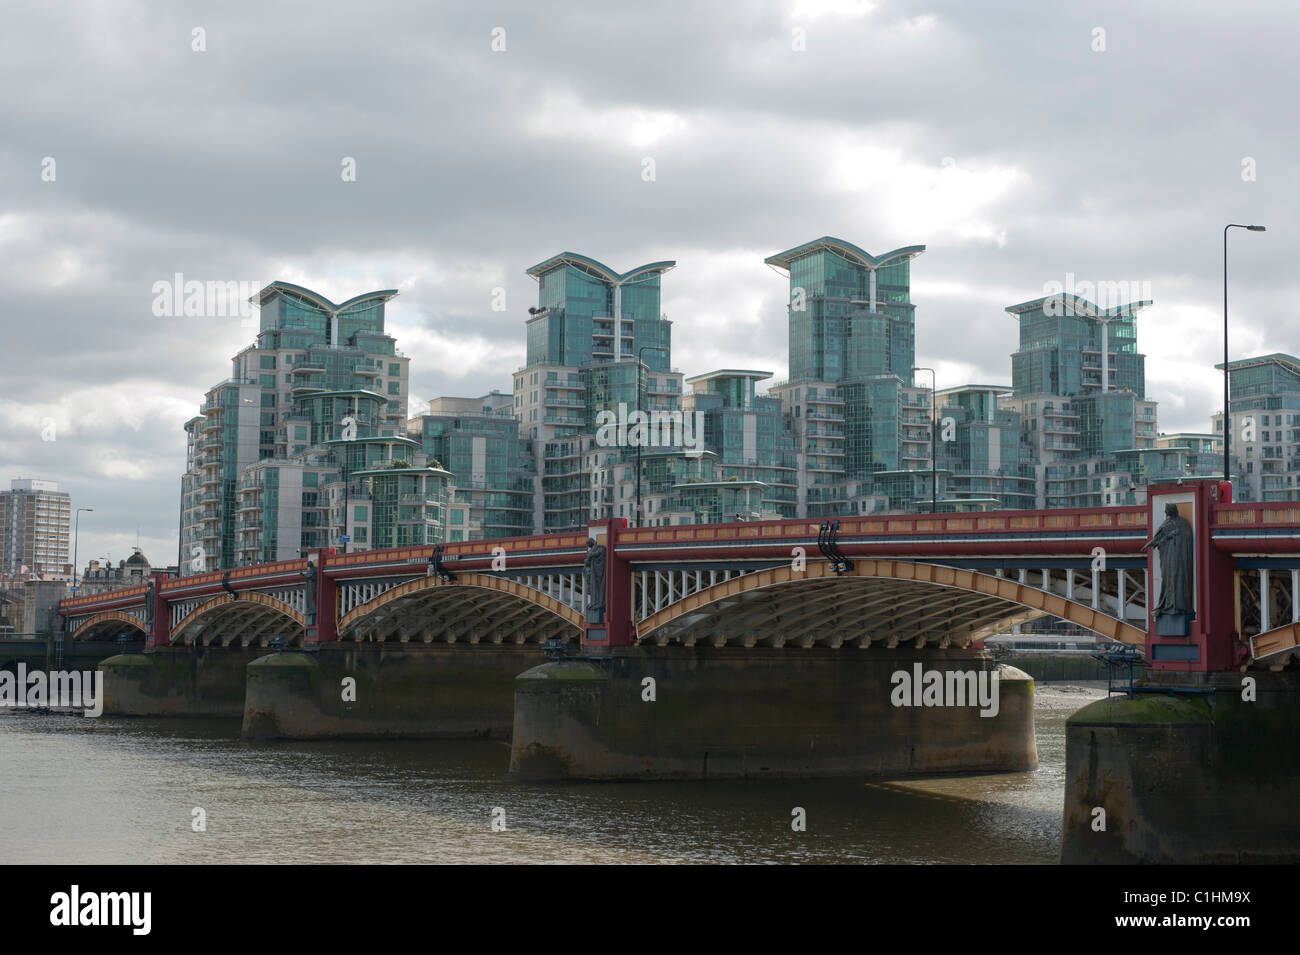 St George Wharf development in Vauxhall, London, seen with Vauxhall Bridge in the foreground Stock Photo